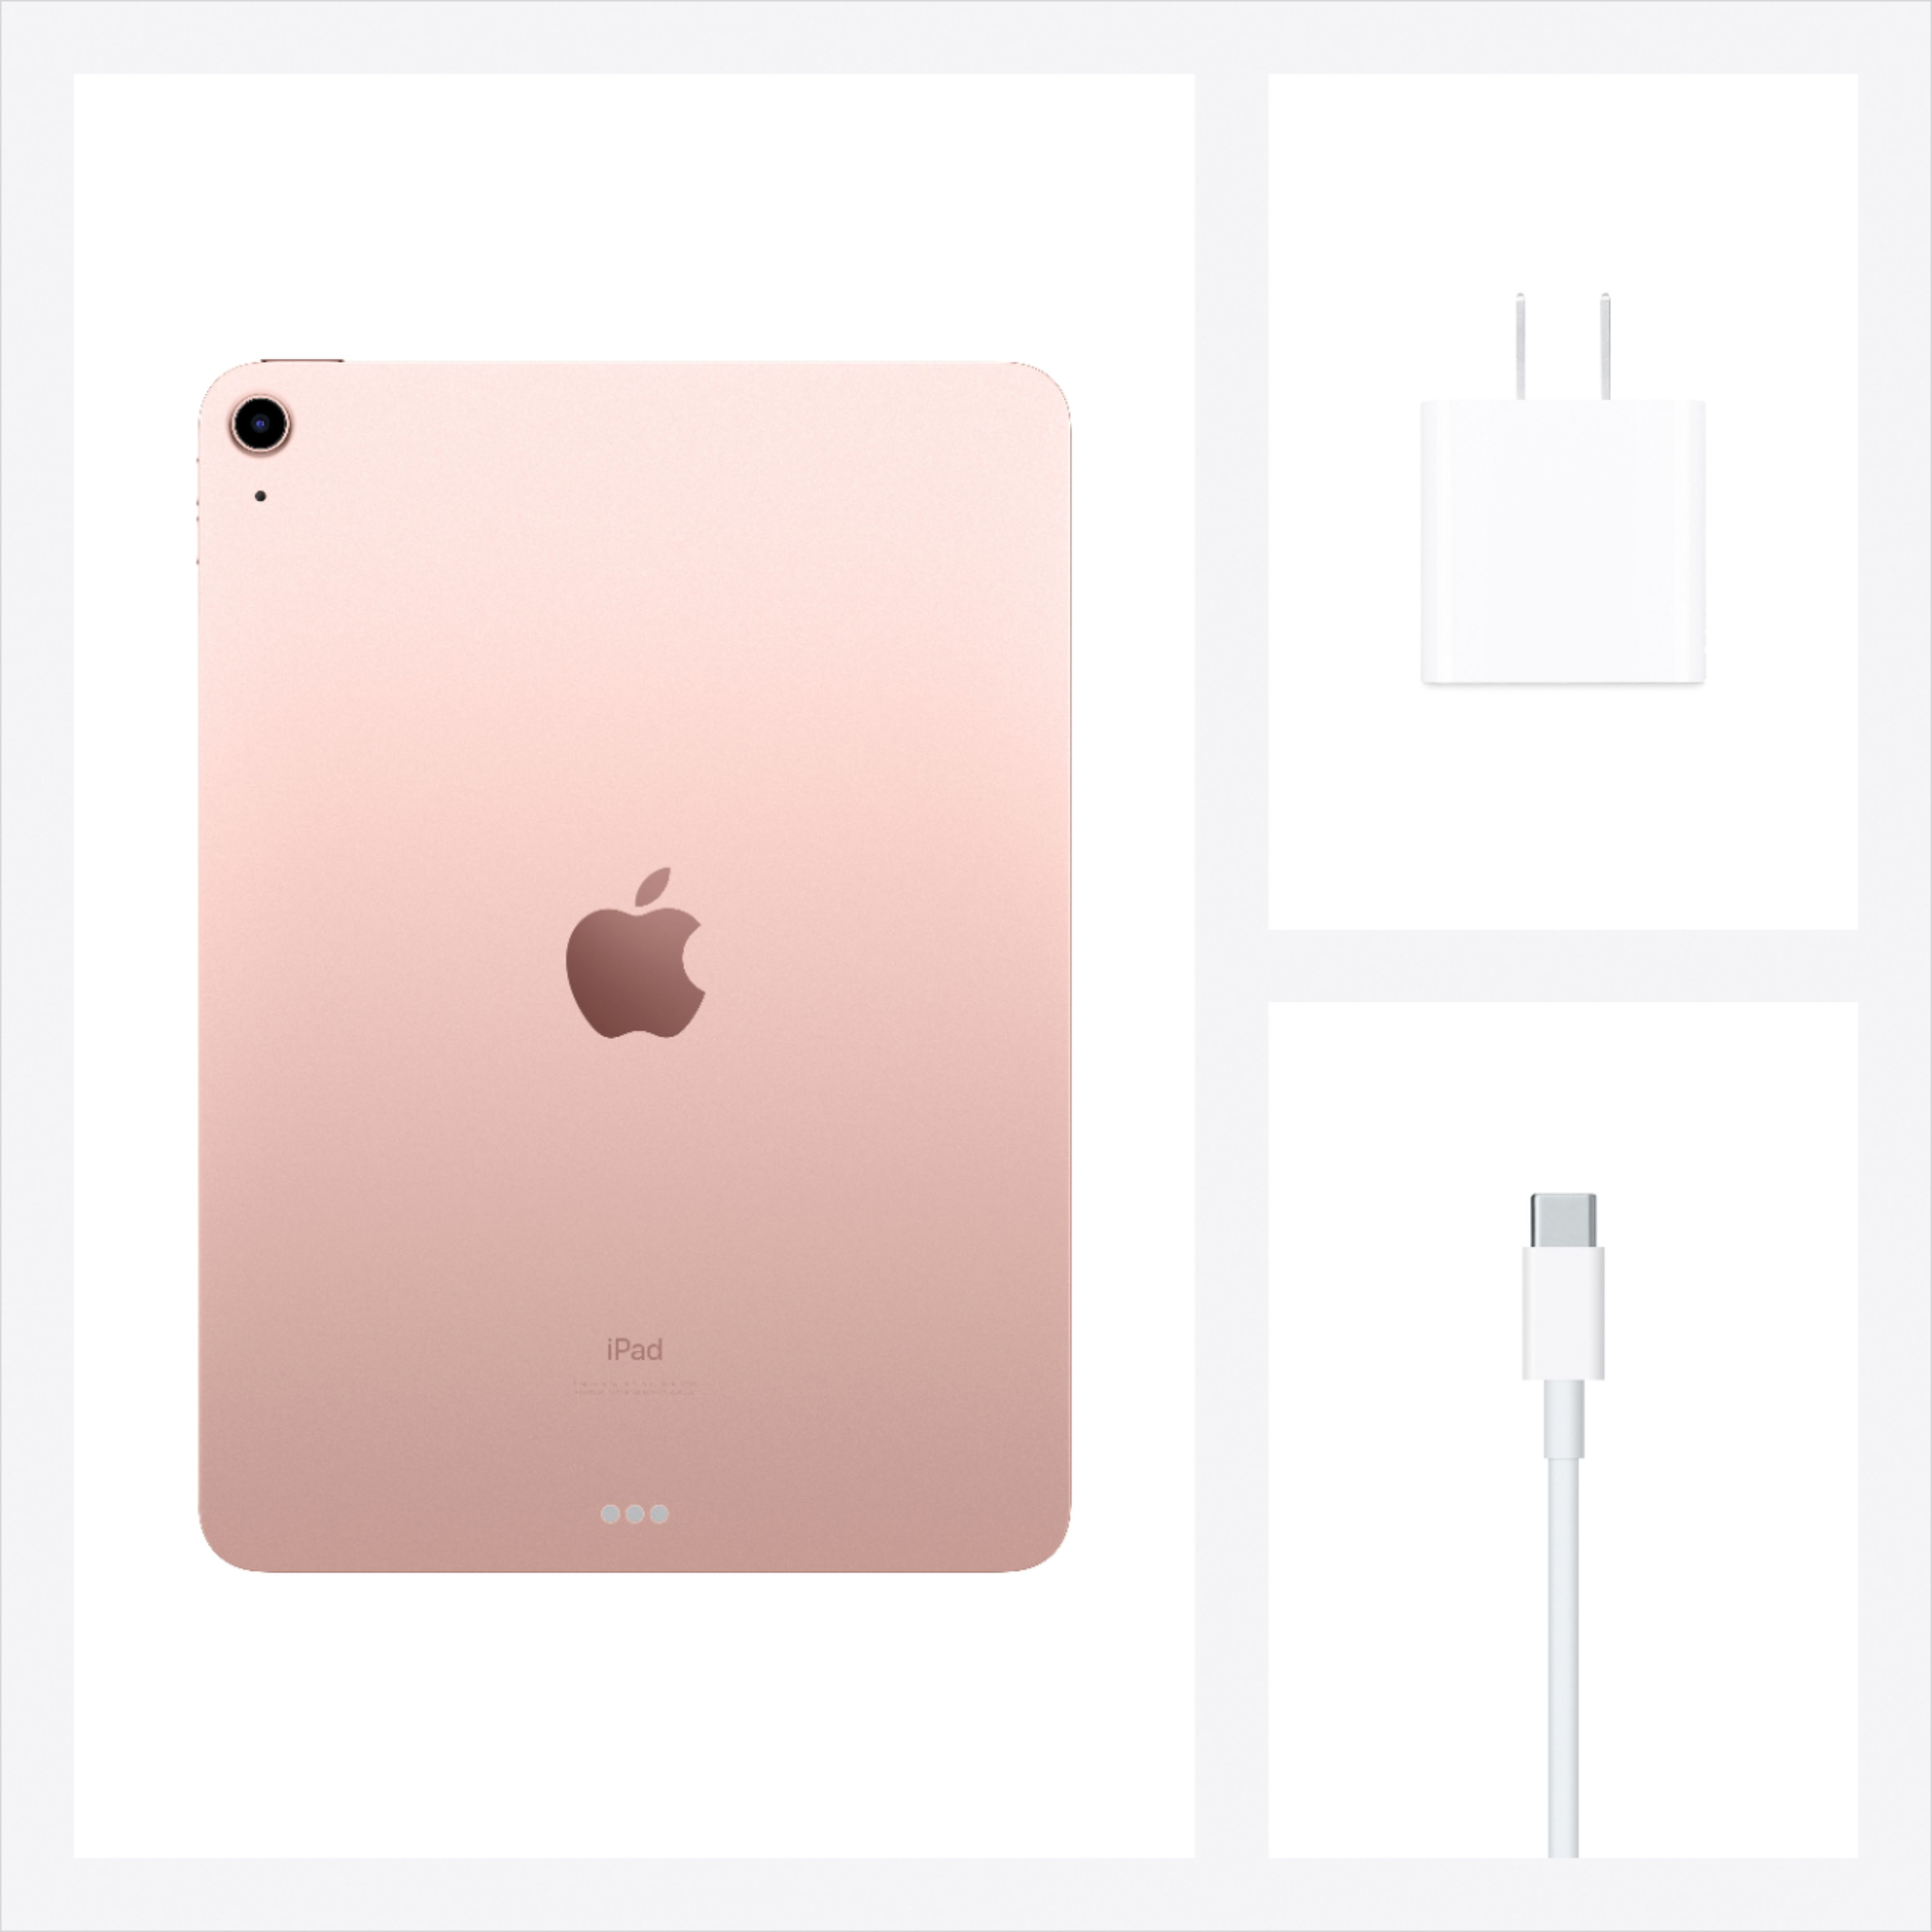 Apple - iPad Air (Latest Model) with Wi-Fi - 64GB - Rose Gold